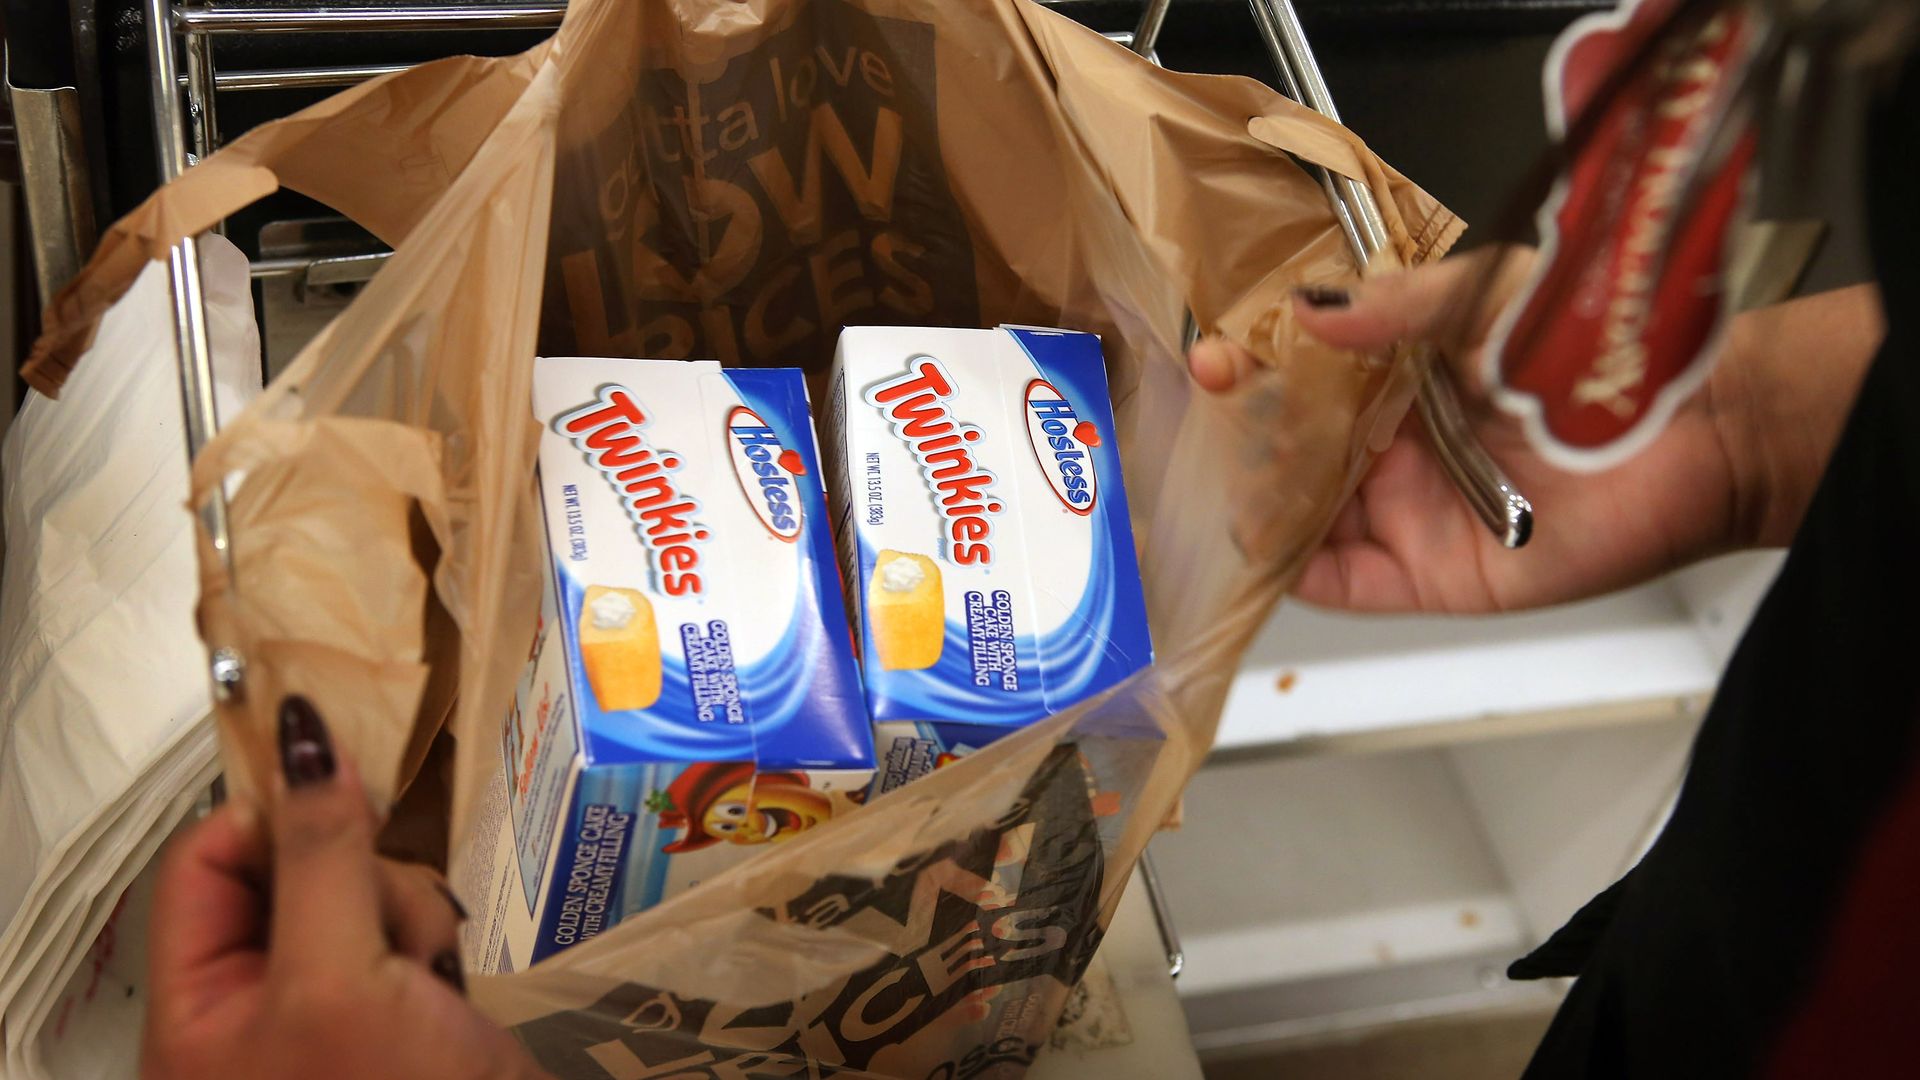 A customer buys boxes of Hostess snacks.